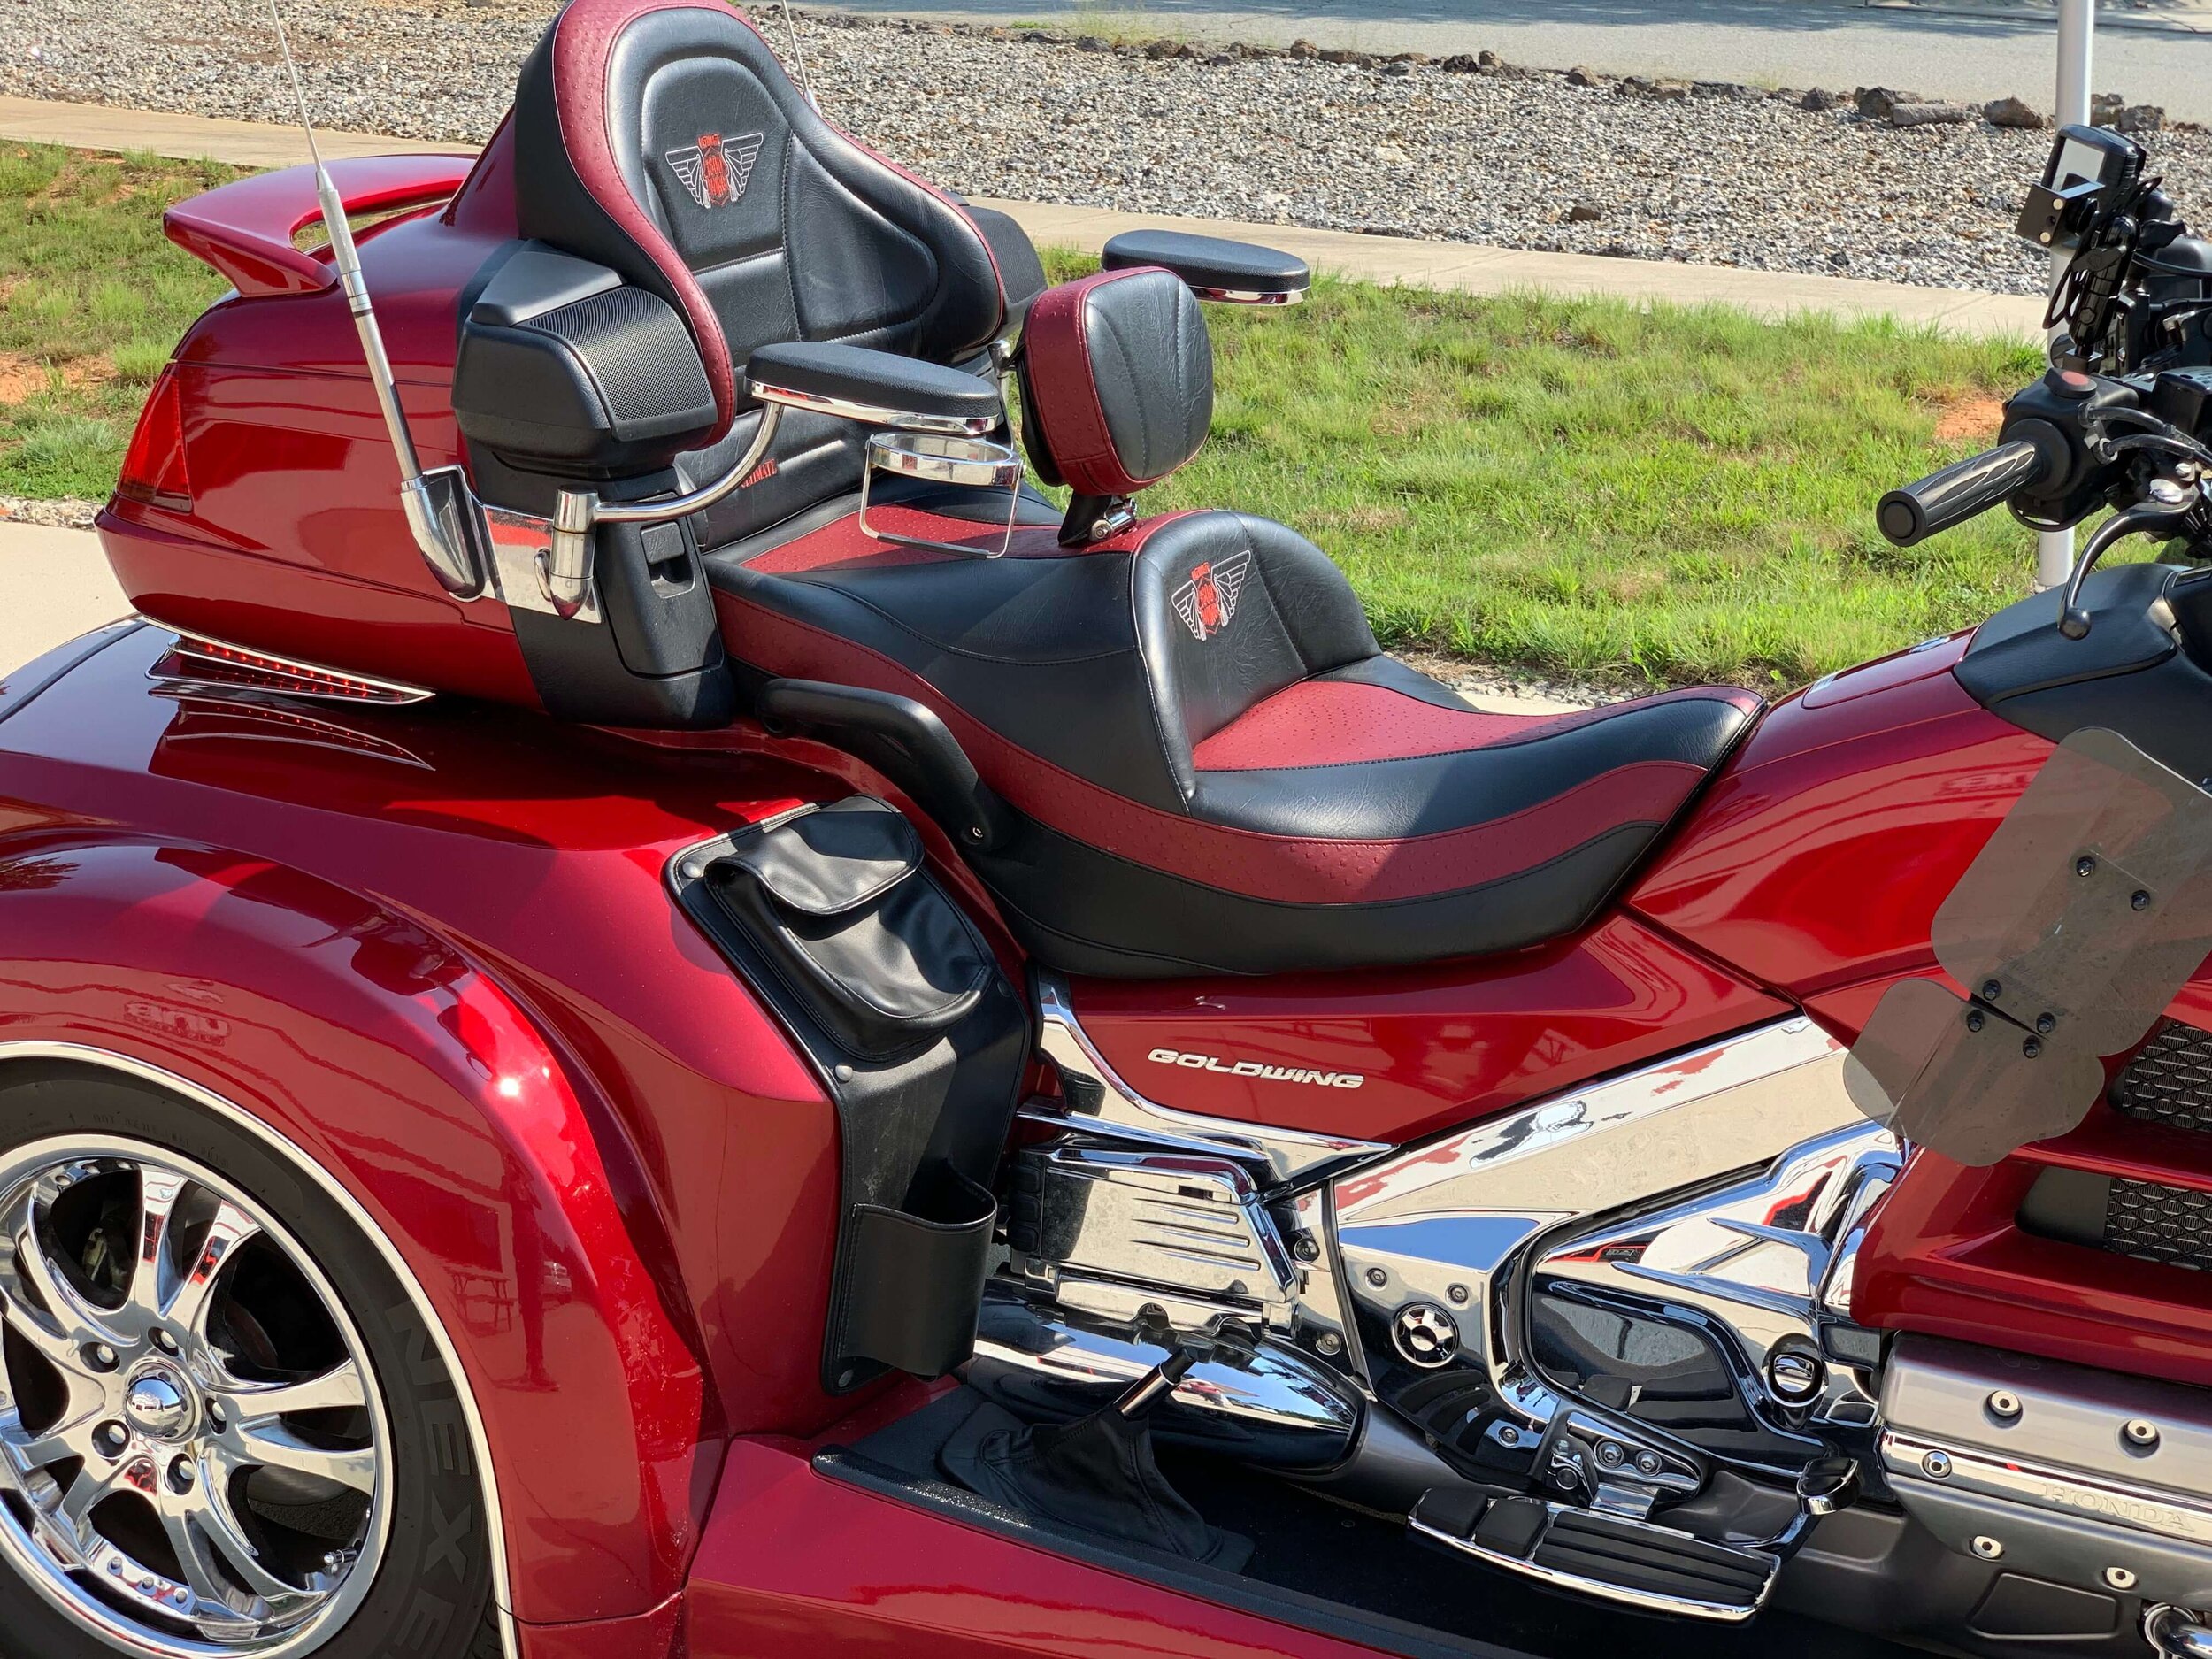 goldwing trikes for sale on craigslist